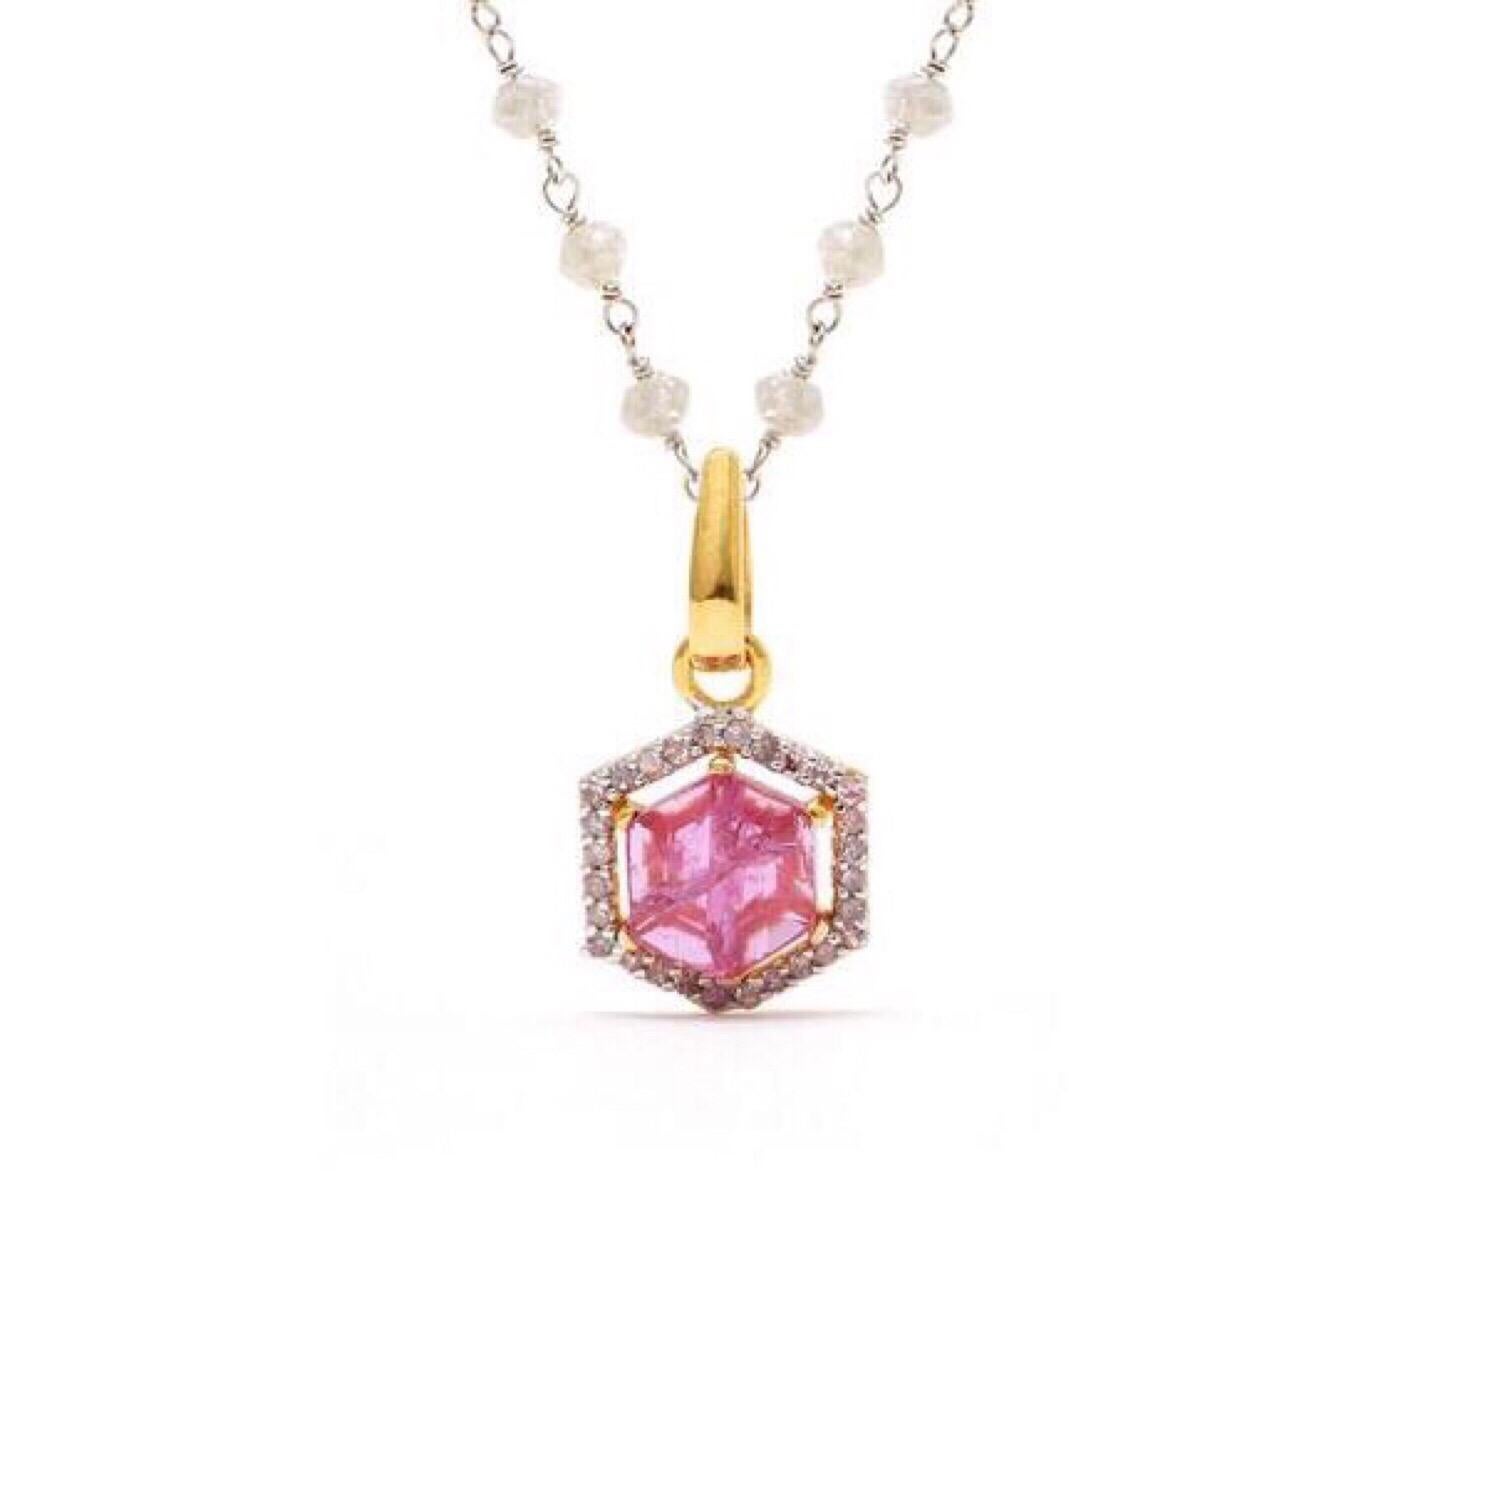 Petit Ruby & Diamond White Diamond Chain Pendant features a fiery natural Mozambique Pink Ruby accented with Brilliant Cut White Diamonds in a handcrafted 18 Garat Gold Pendant.

- Natural Mozambique Pink Ruby set with white diamonds.
- Set with 18